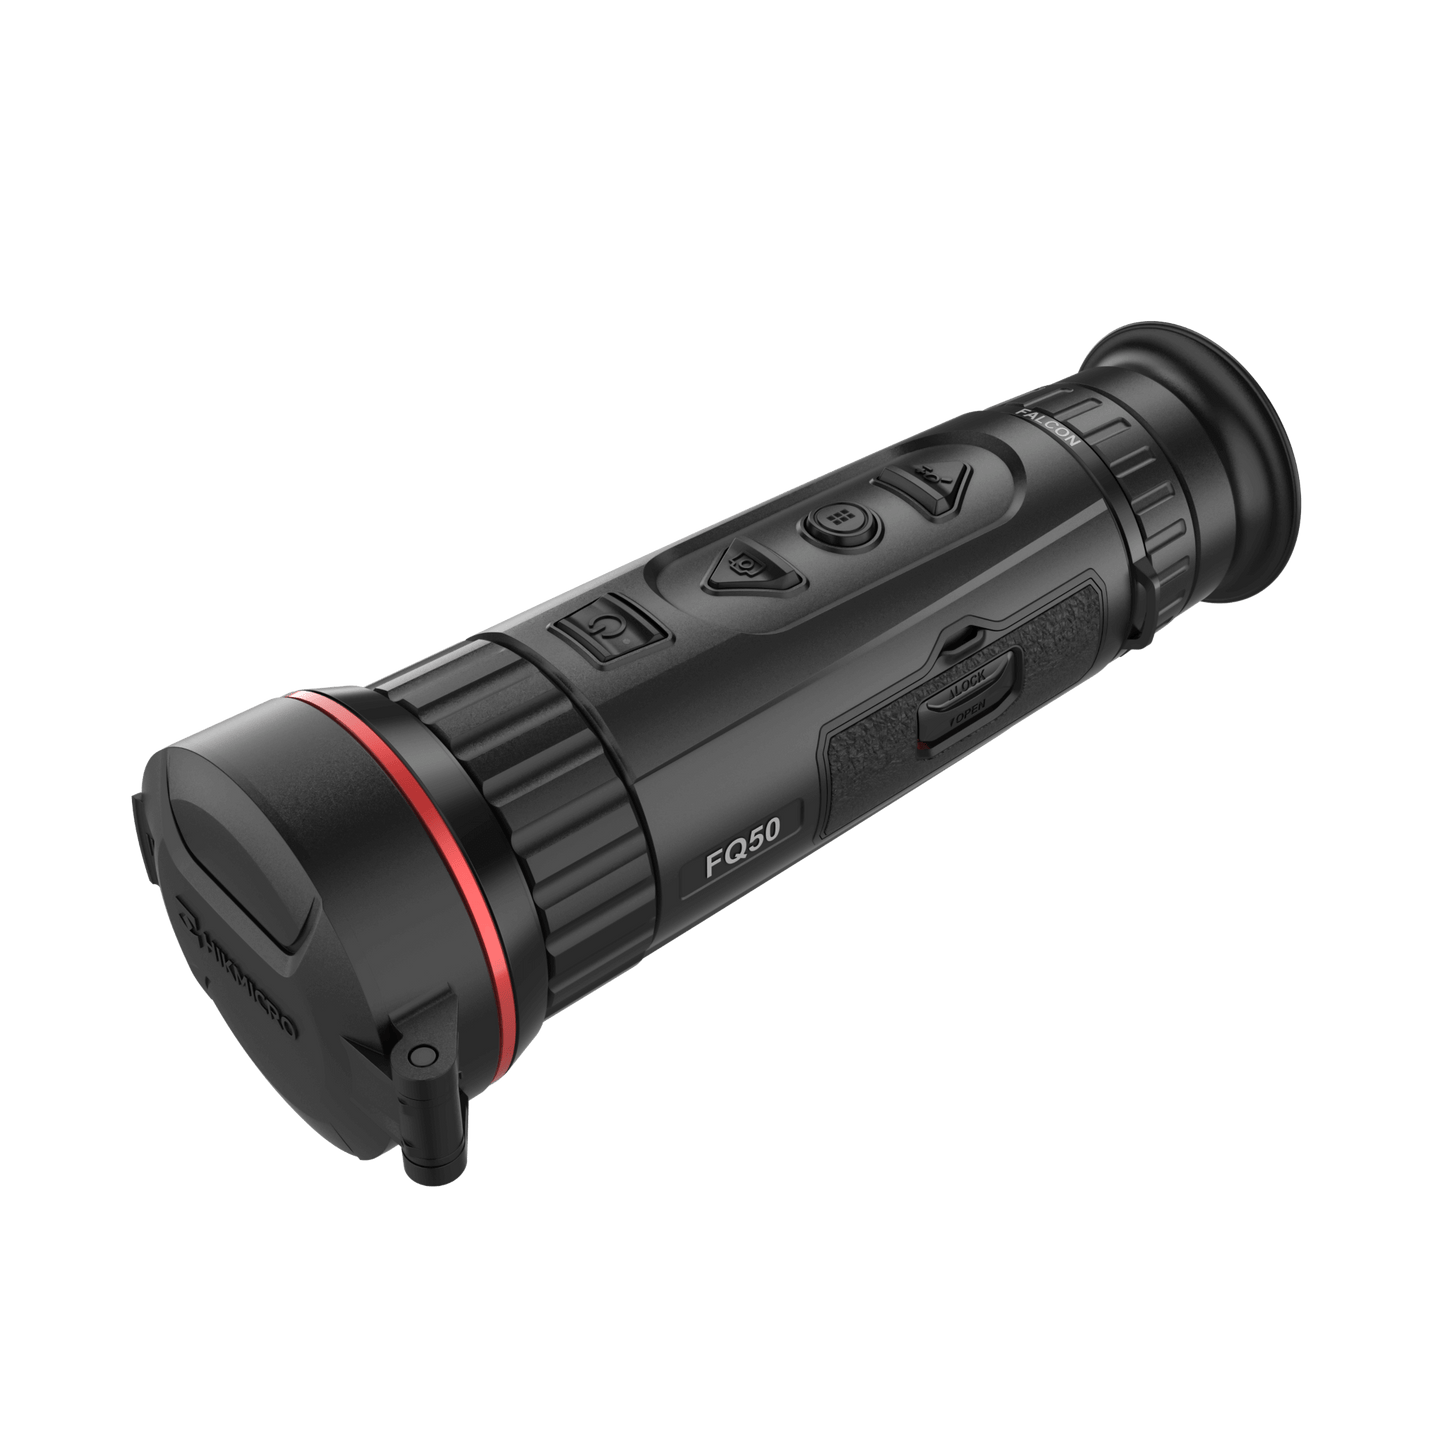 HikMicro Thermal Imaging Monocular for Sale - HikMicro Falcon Series FQ50 - HM-TS46-35XG_W-FQ50 -  Front Left View from Top